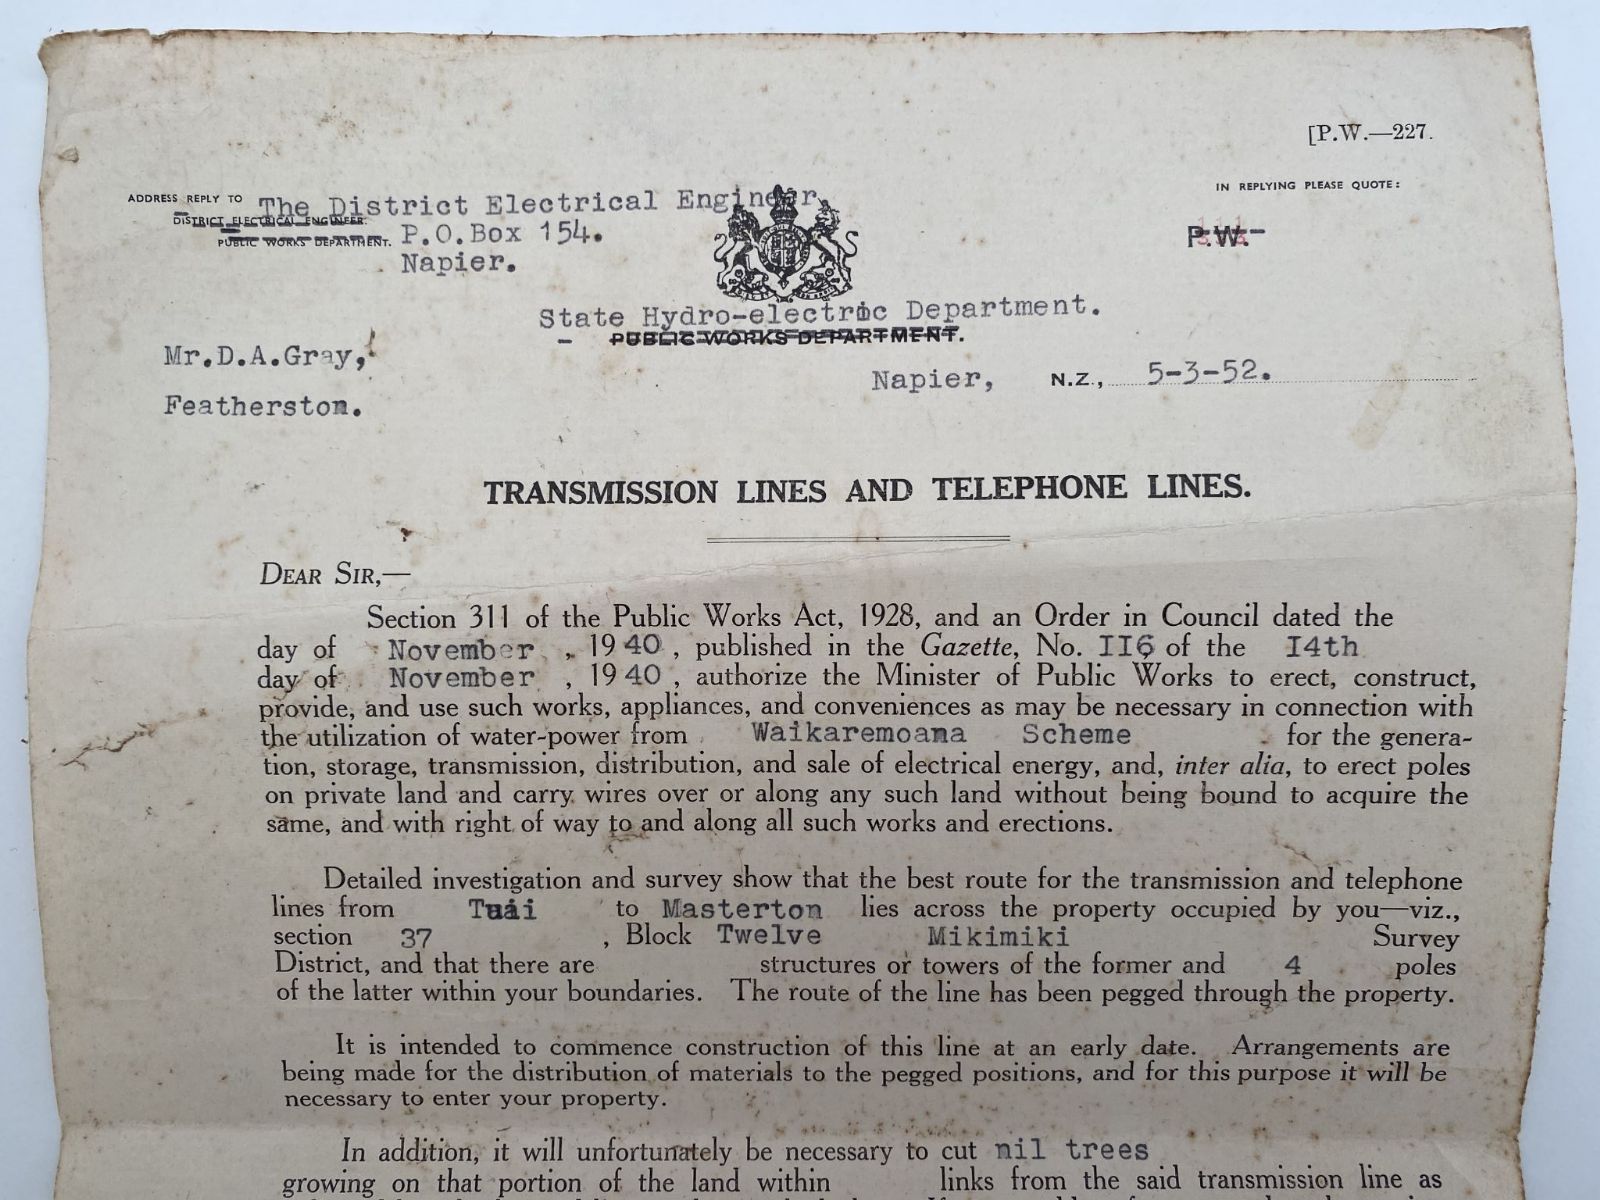 OLD LETTERHEAD: Public Works Department - Transmission and Telephone Lines 1952